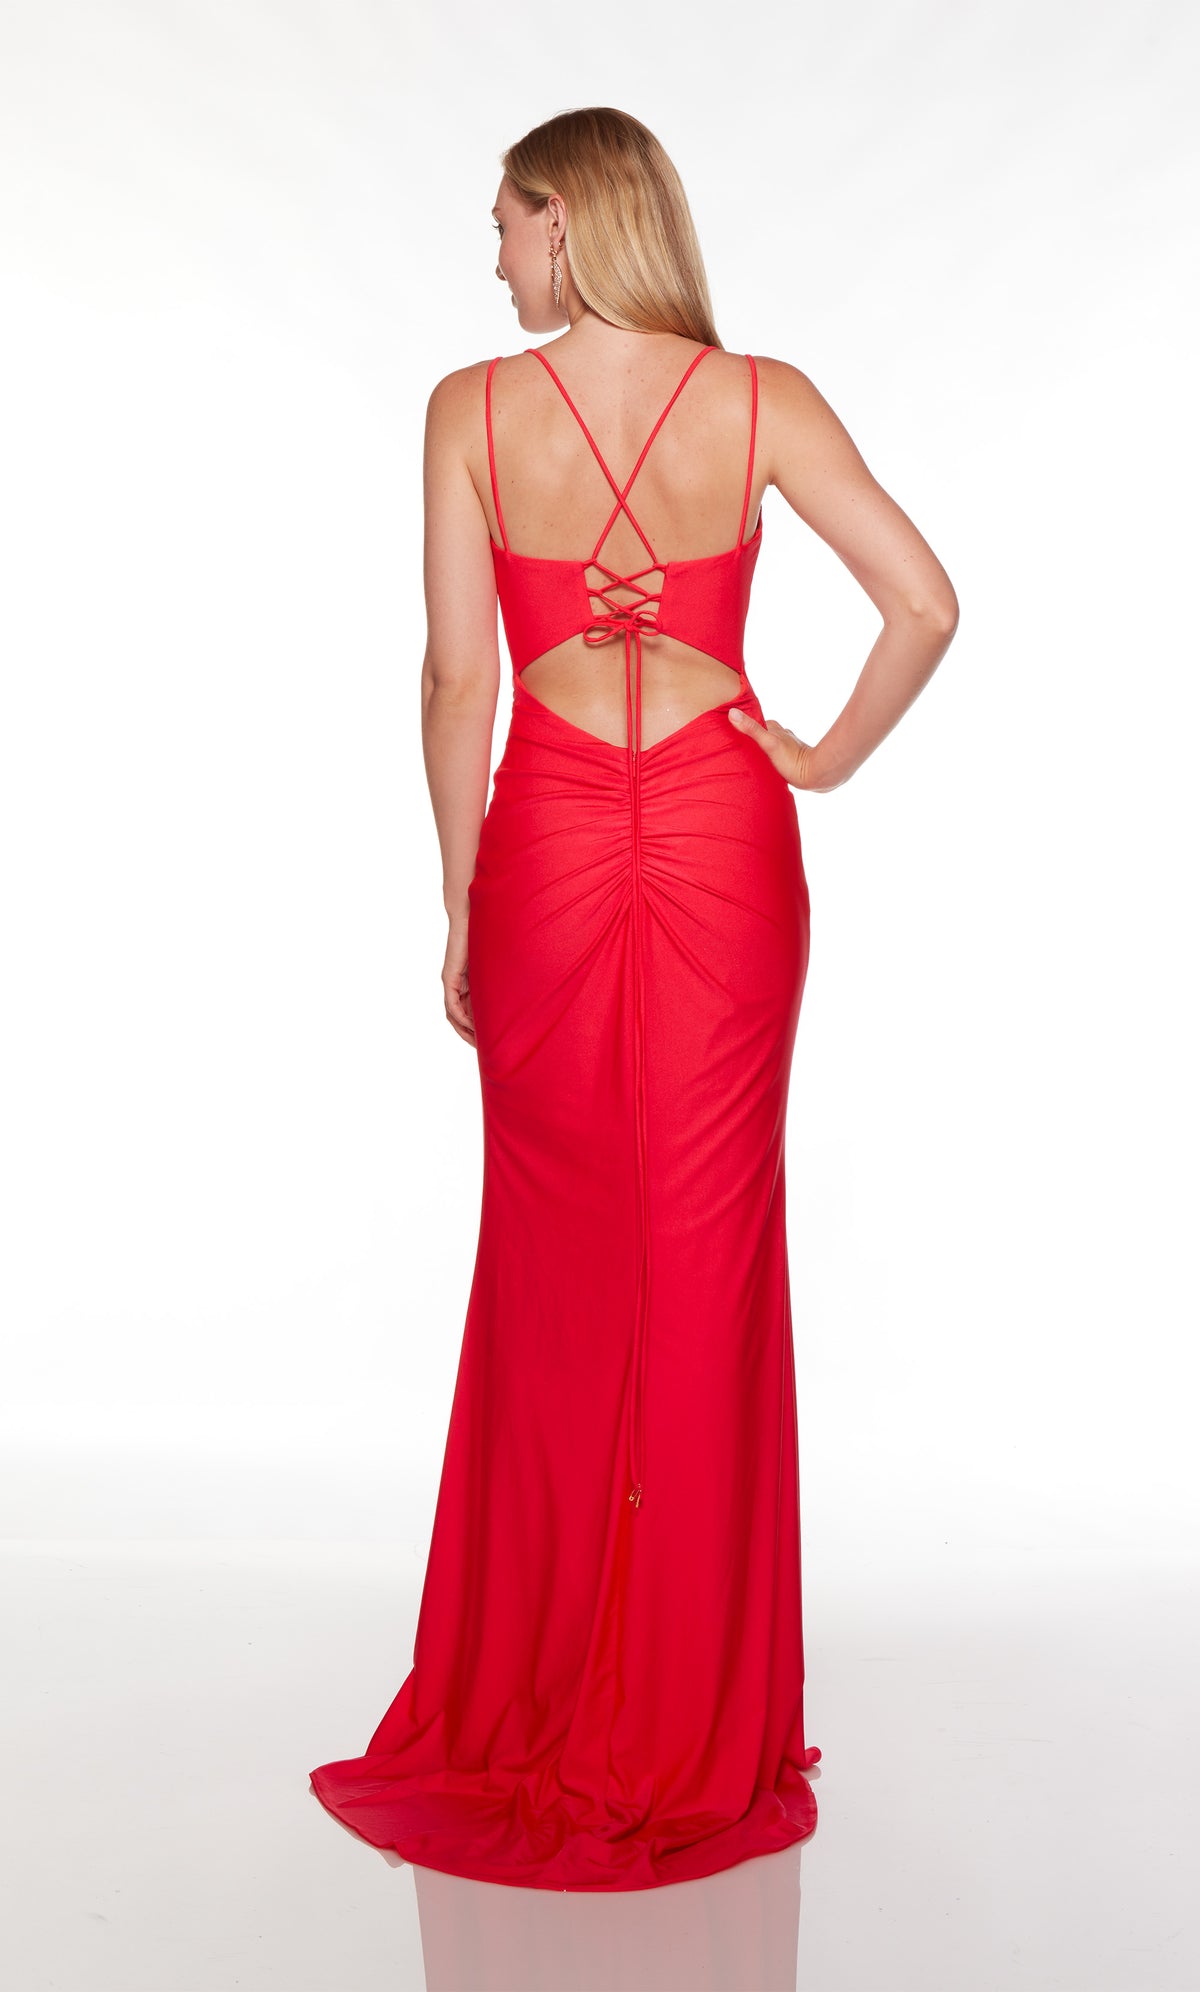 Long cutout back dress with slight train in red.